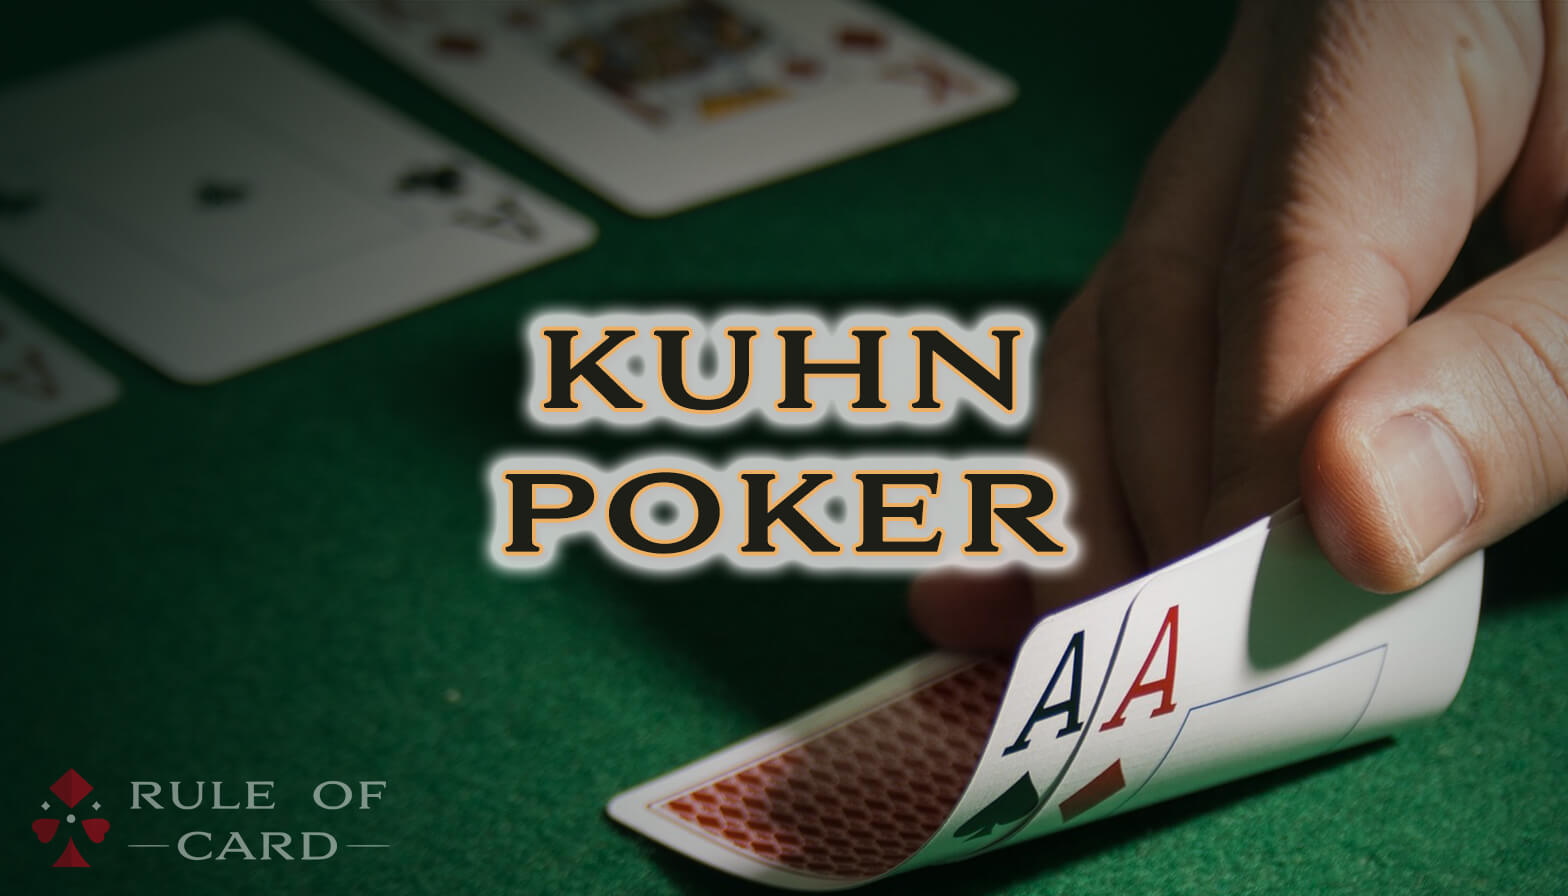 Playing the card game Kuhn Poker